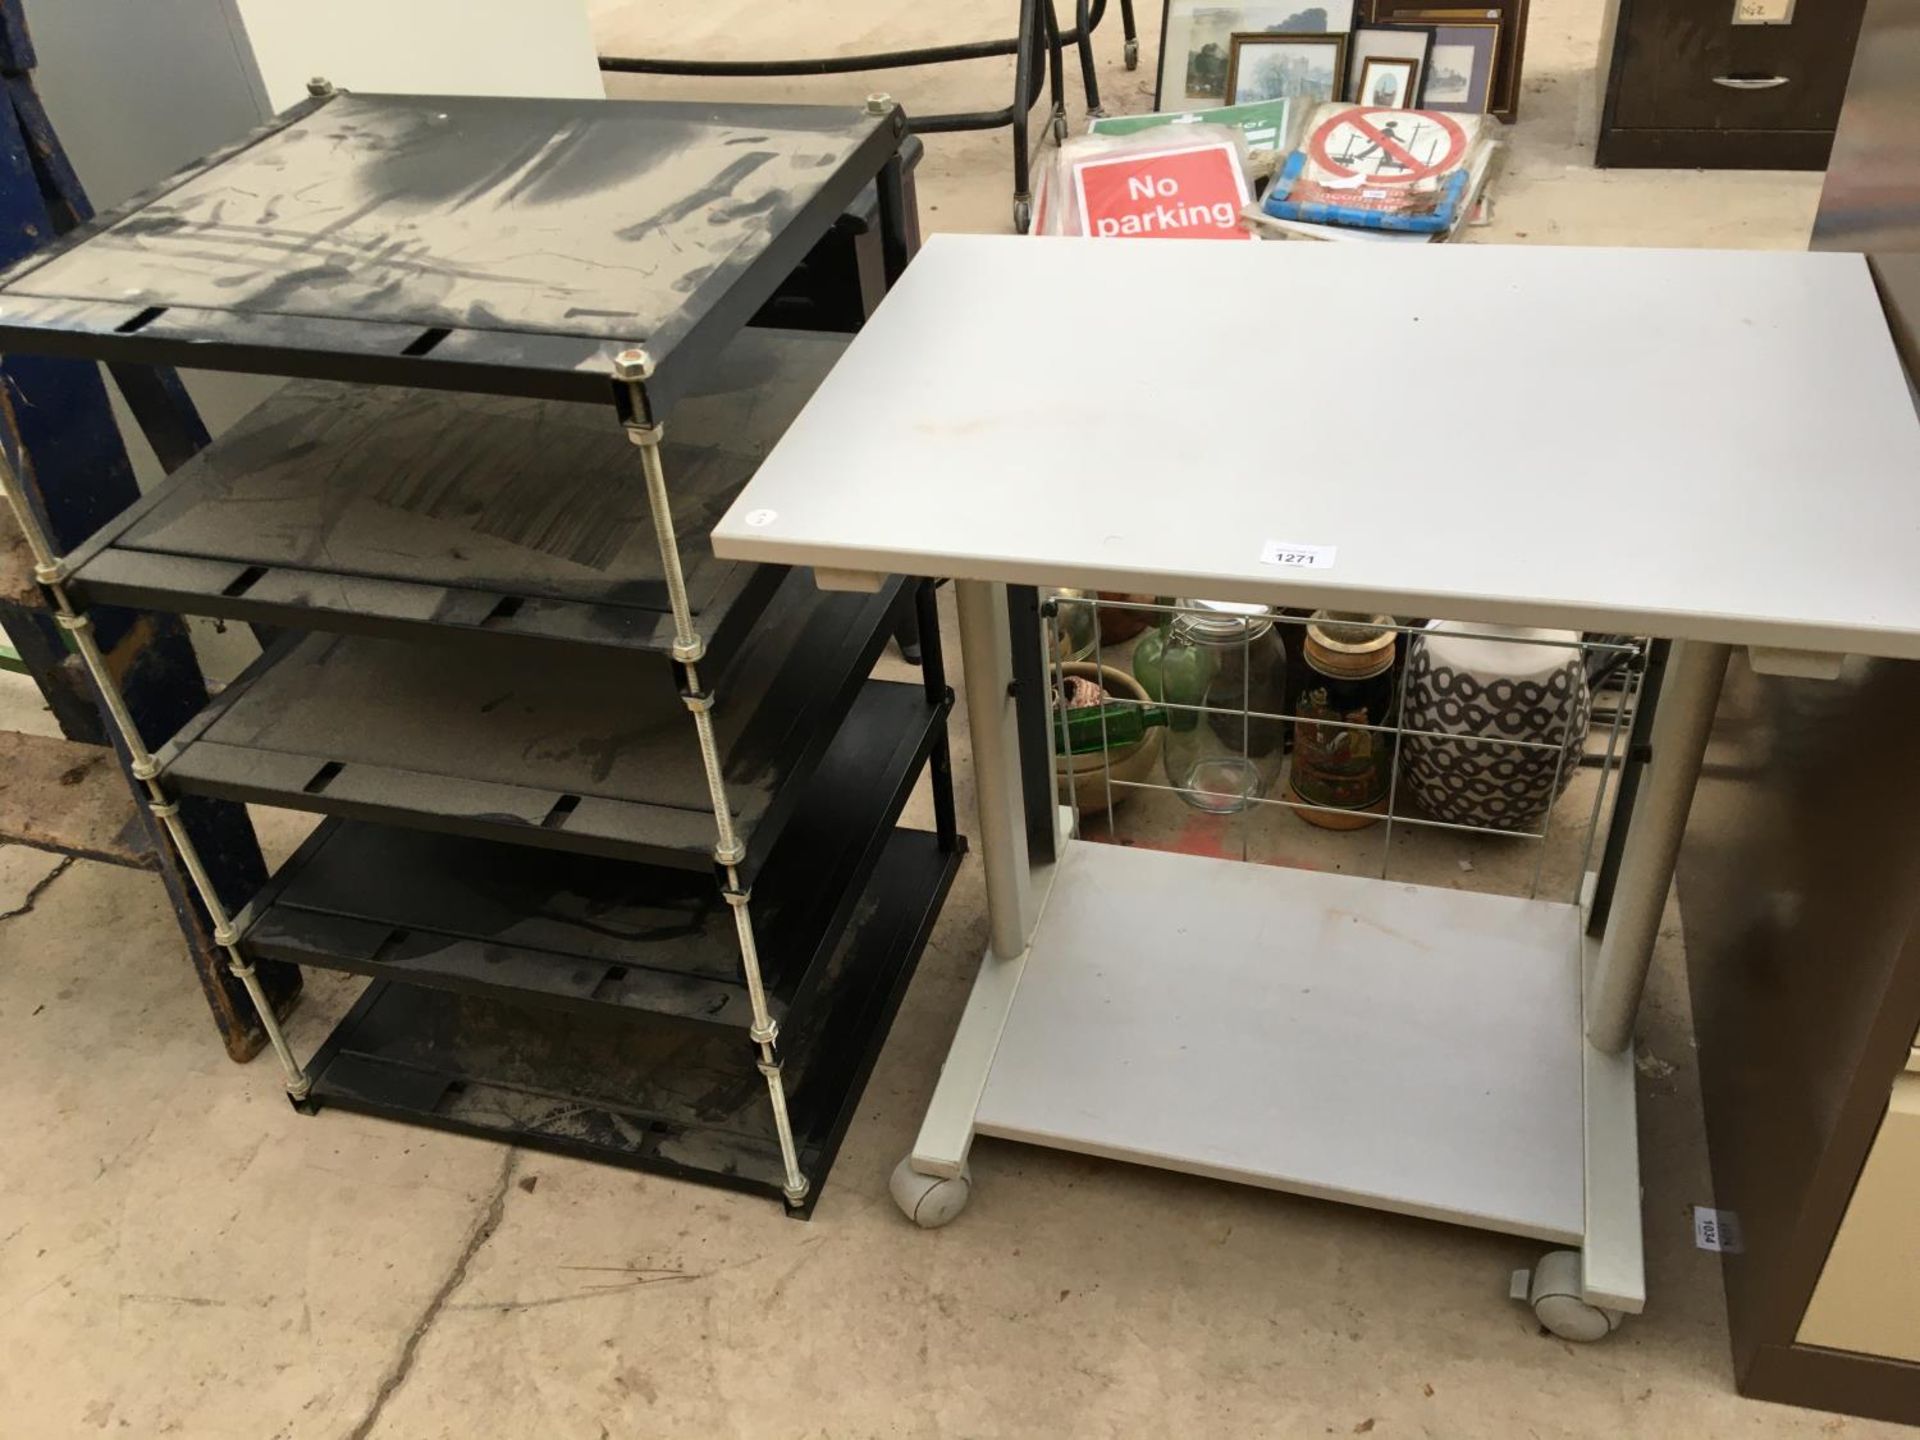 A PLASTIC AND METAL COMPUTER TABLE AND A HEAVY METAL FOUR SHELF UNIT